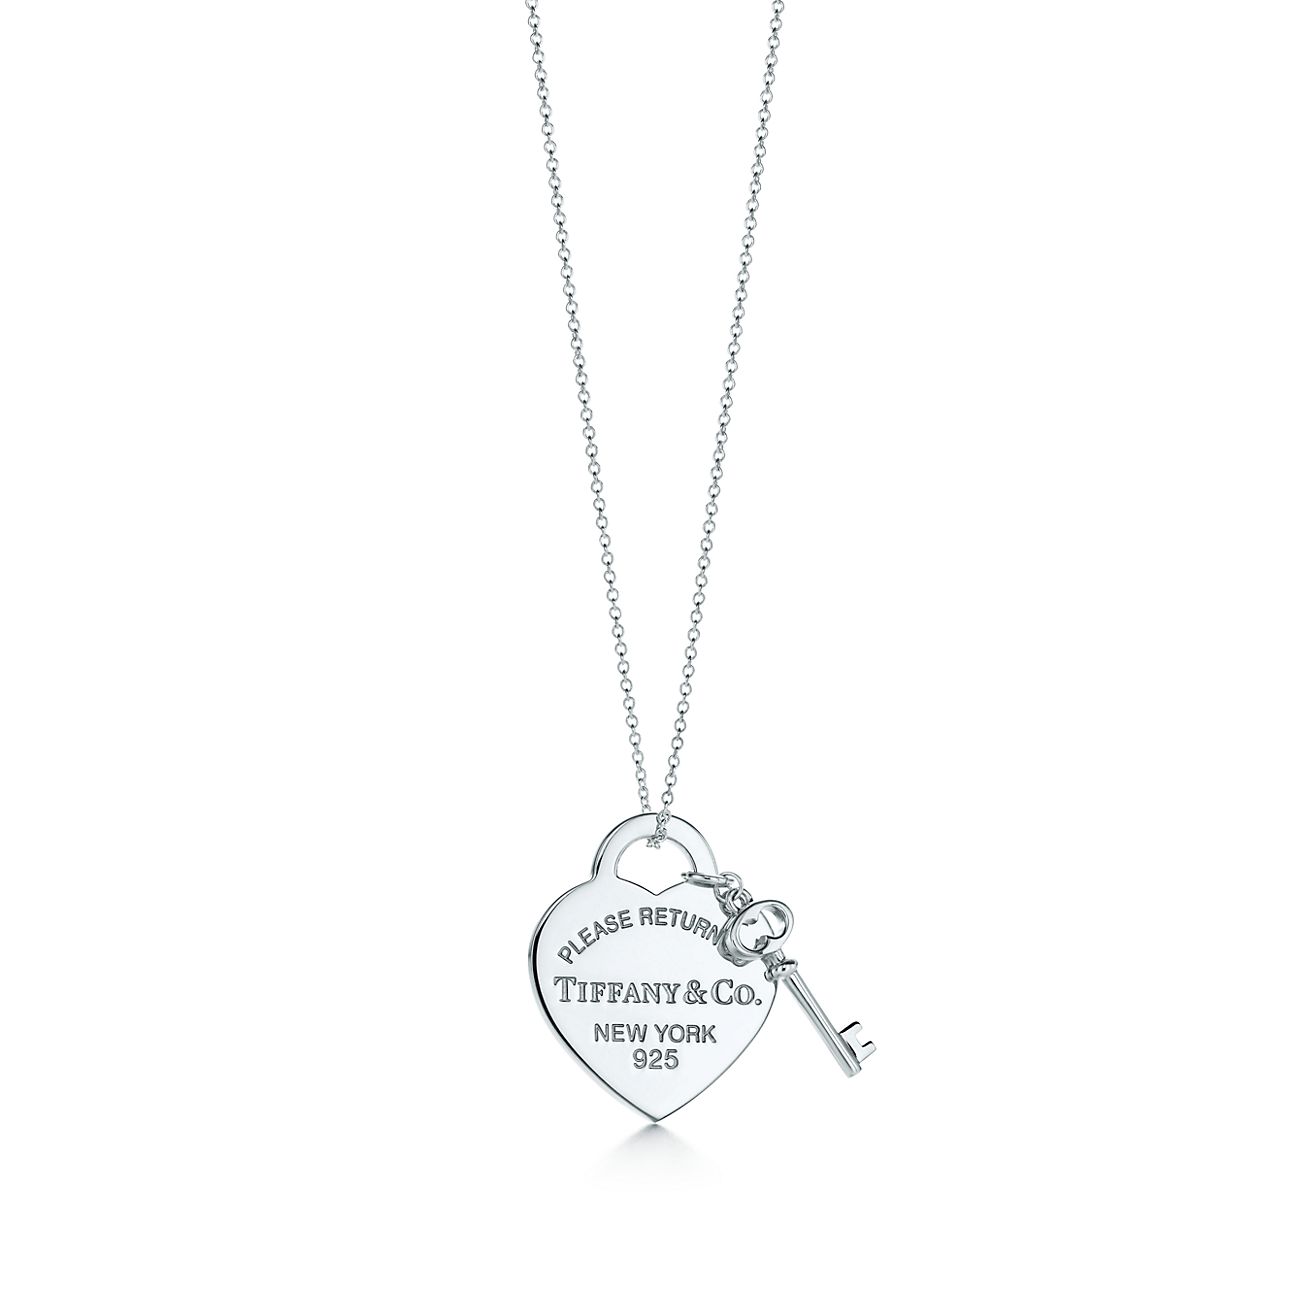 Exert Specifically Depression Return to Tiffany® medium heart tag with key pendant in sterling silver. |  Tiffany & Co.